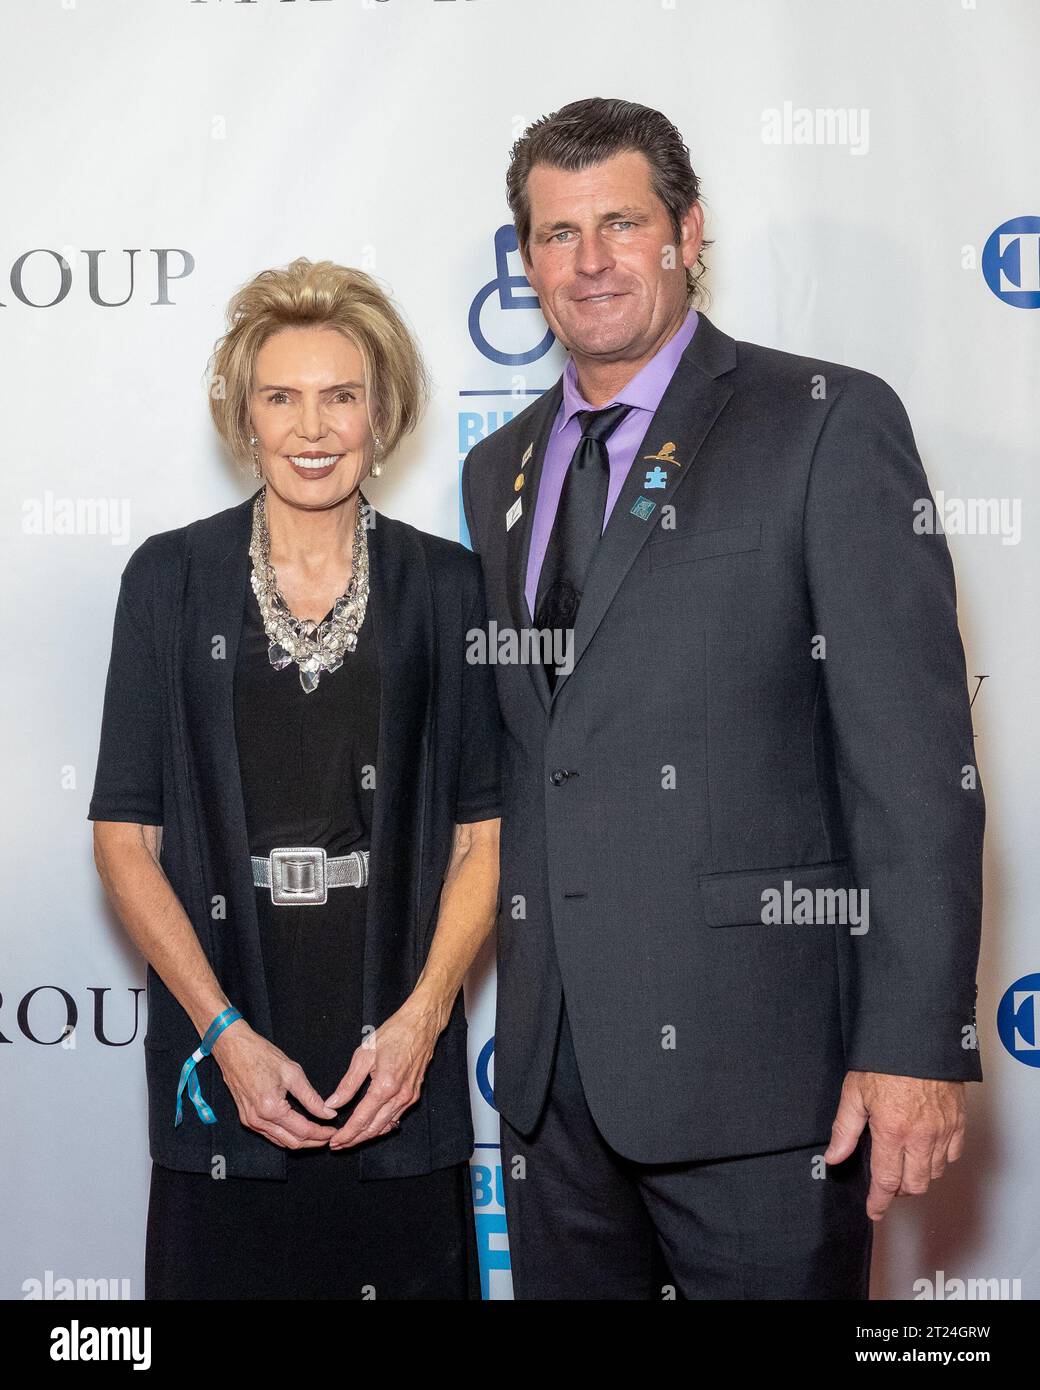 New York, USA. 16th Oct, 2023. (L-R) Lesley Visser and Scott Erickson arrive on the red carpet for the Buoniconti Fund To Cure Paralysis' 38th Annual Great Sports Legends Dinner at the Marriott Marquis in New York, New York, on Oct. 16, 2023. (Photo by Gabriele Holtermann/Sipa USA) Credit: Sipa USA/Alamy Live News Stock Photo